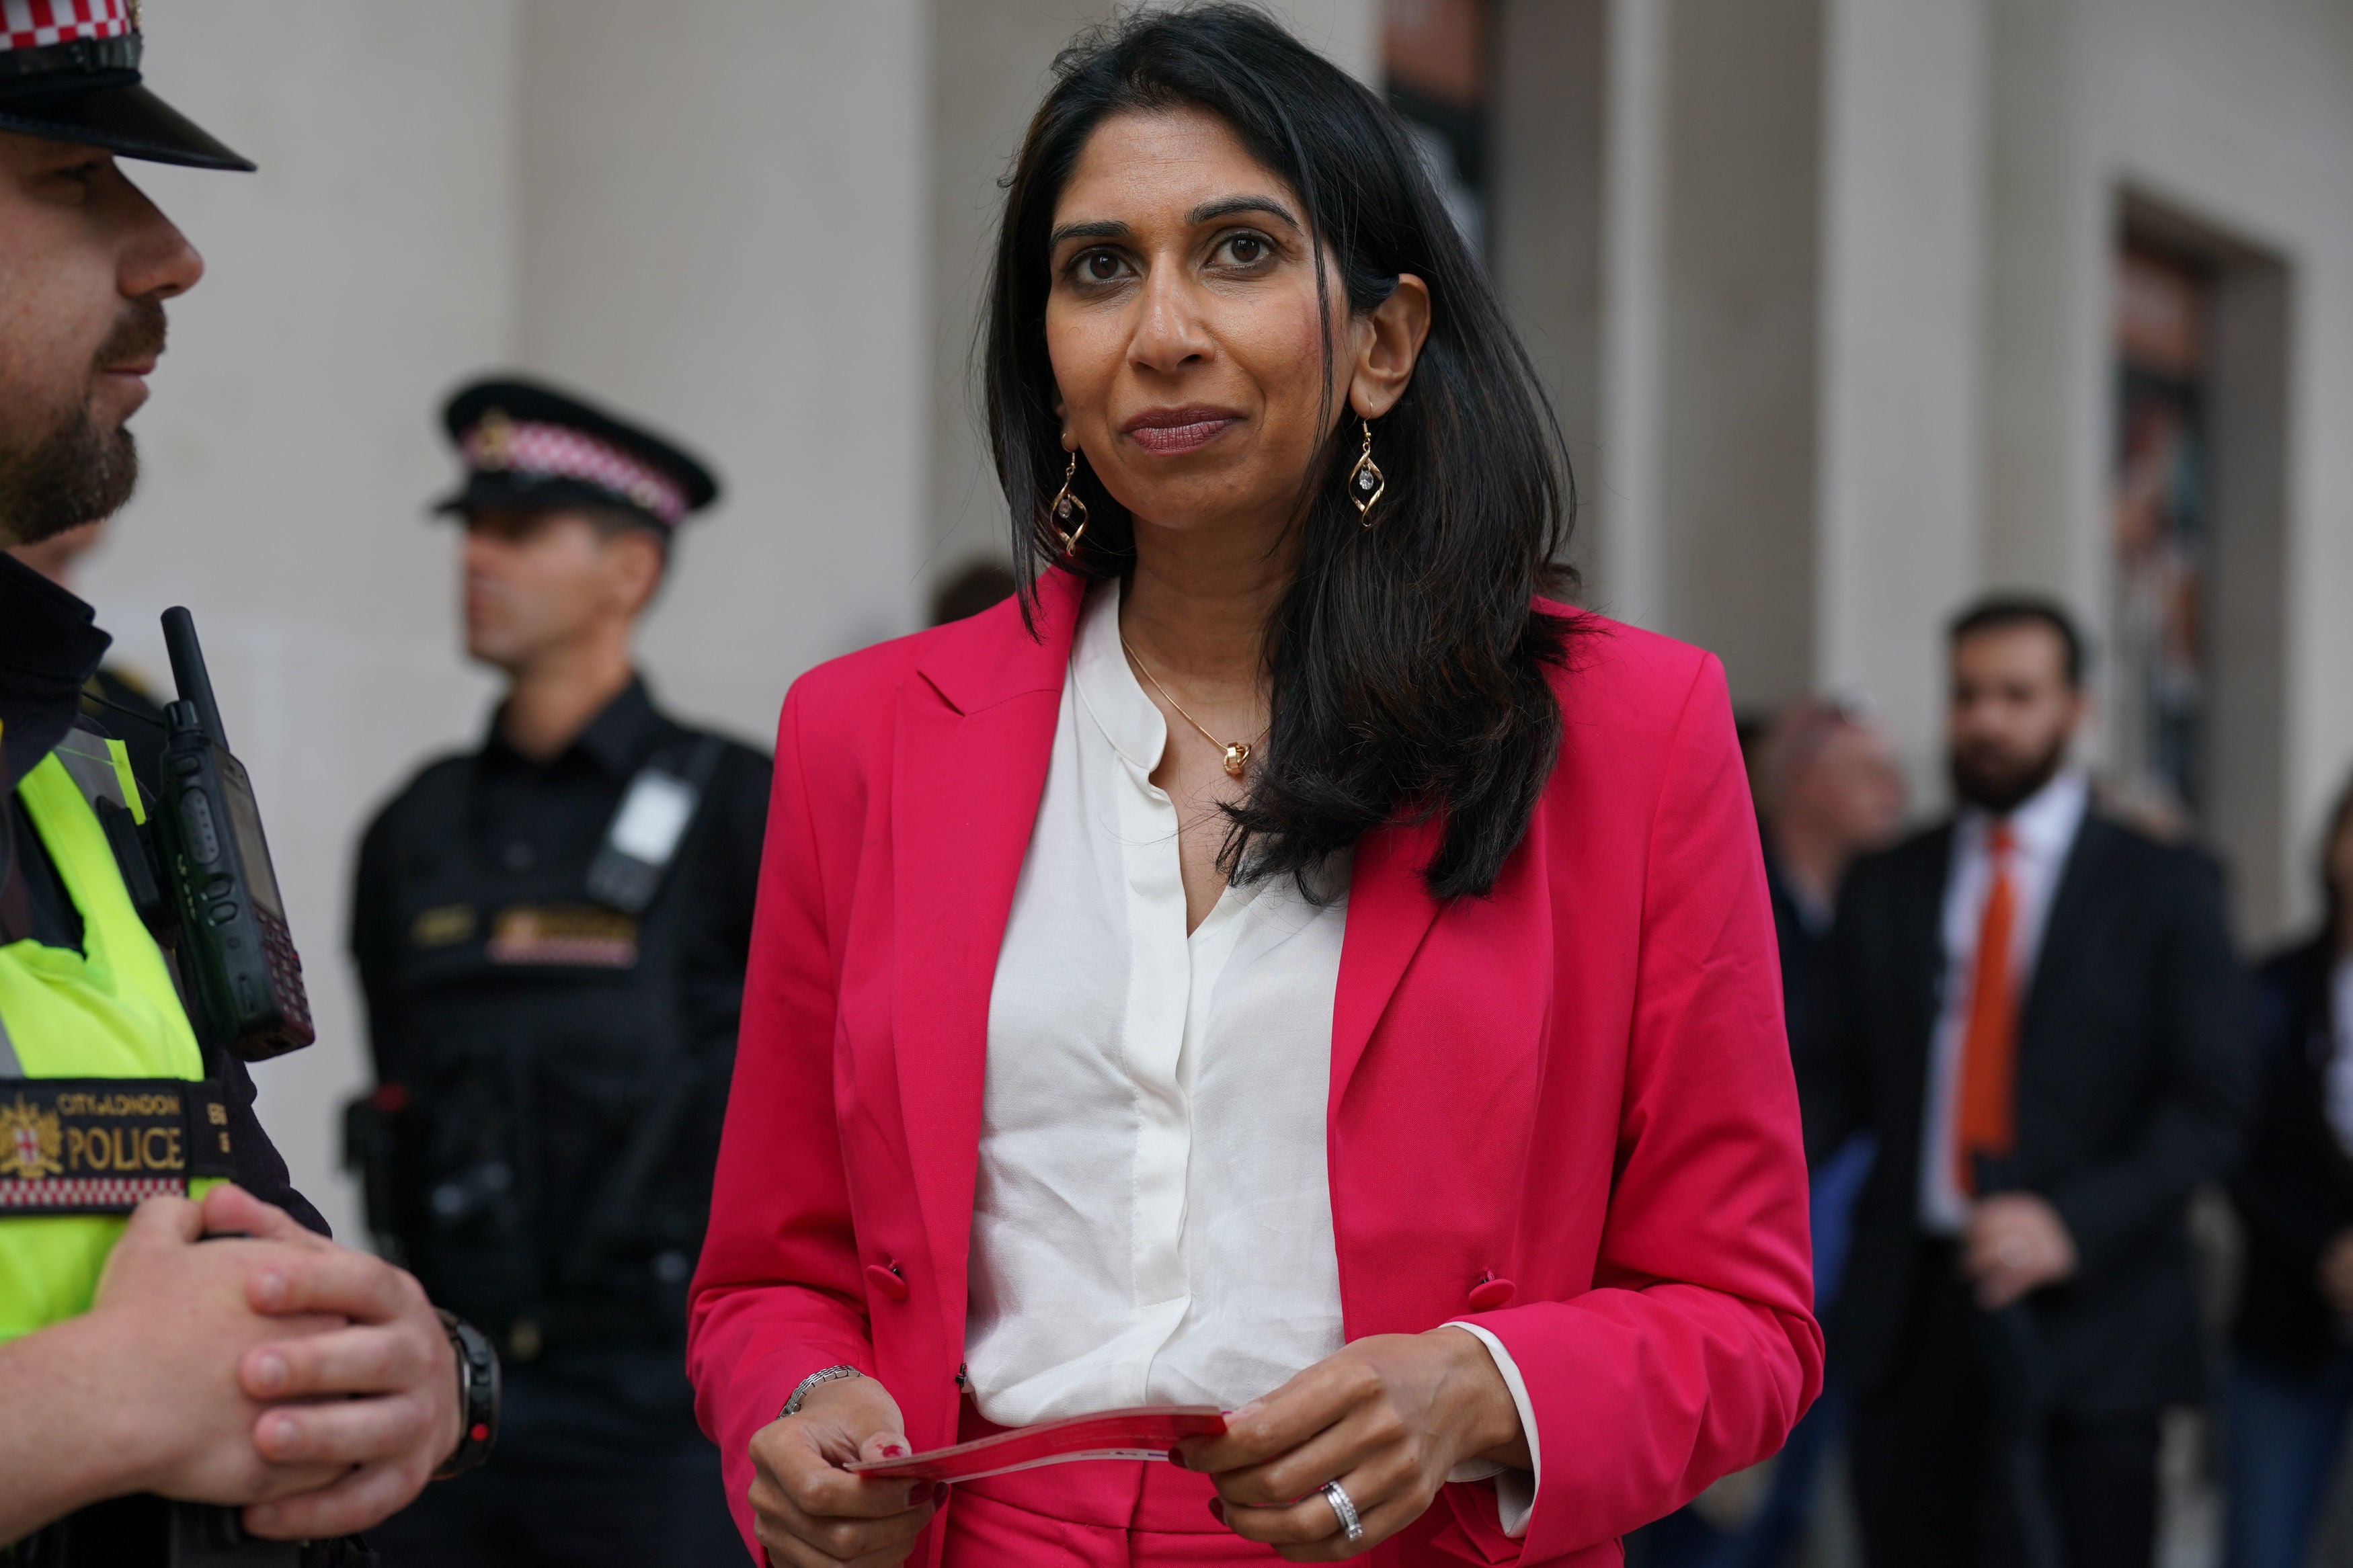 Suella Braverman has ordered an impartiality review after claiming police officers are ‘pandering to political causes’